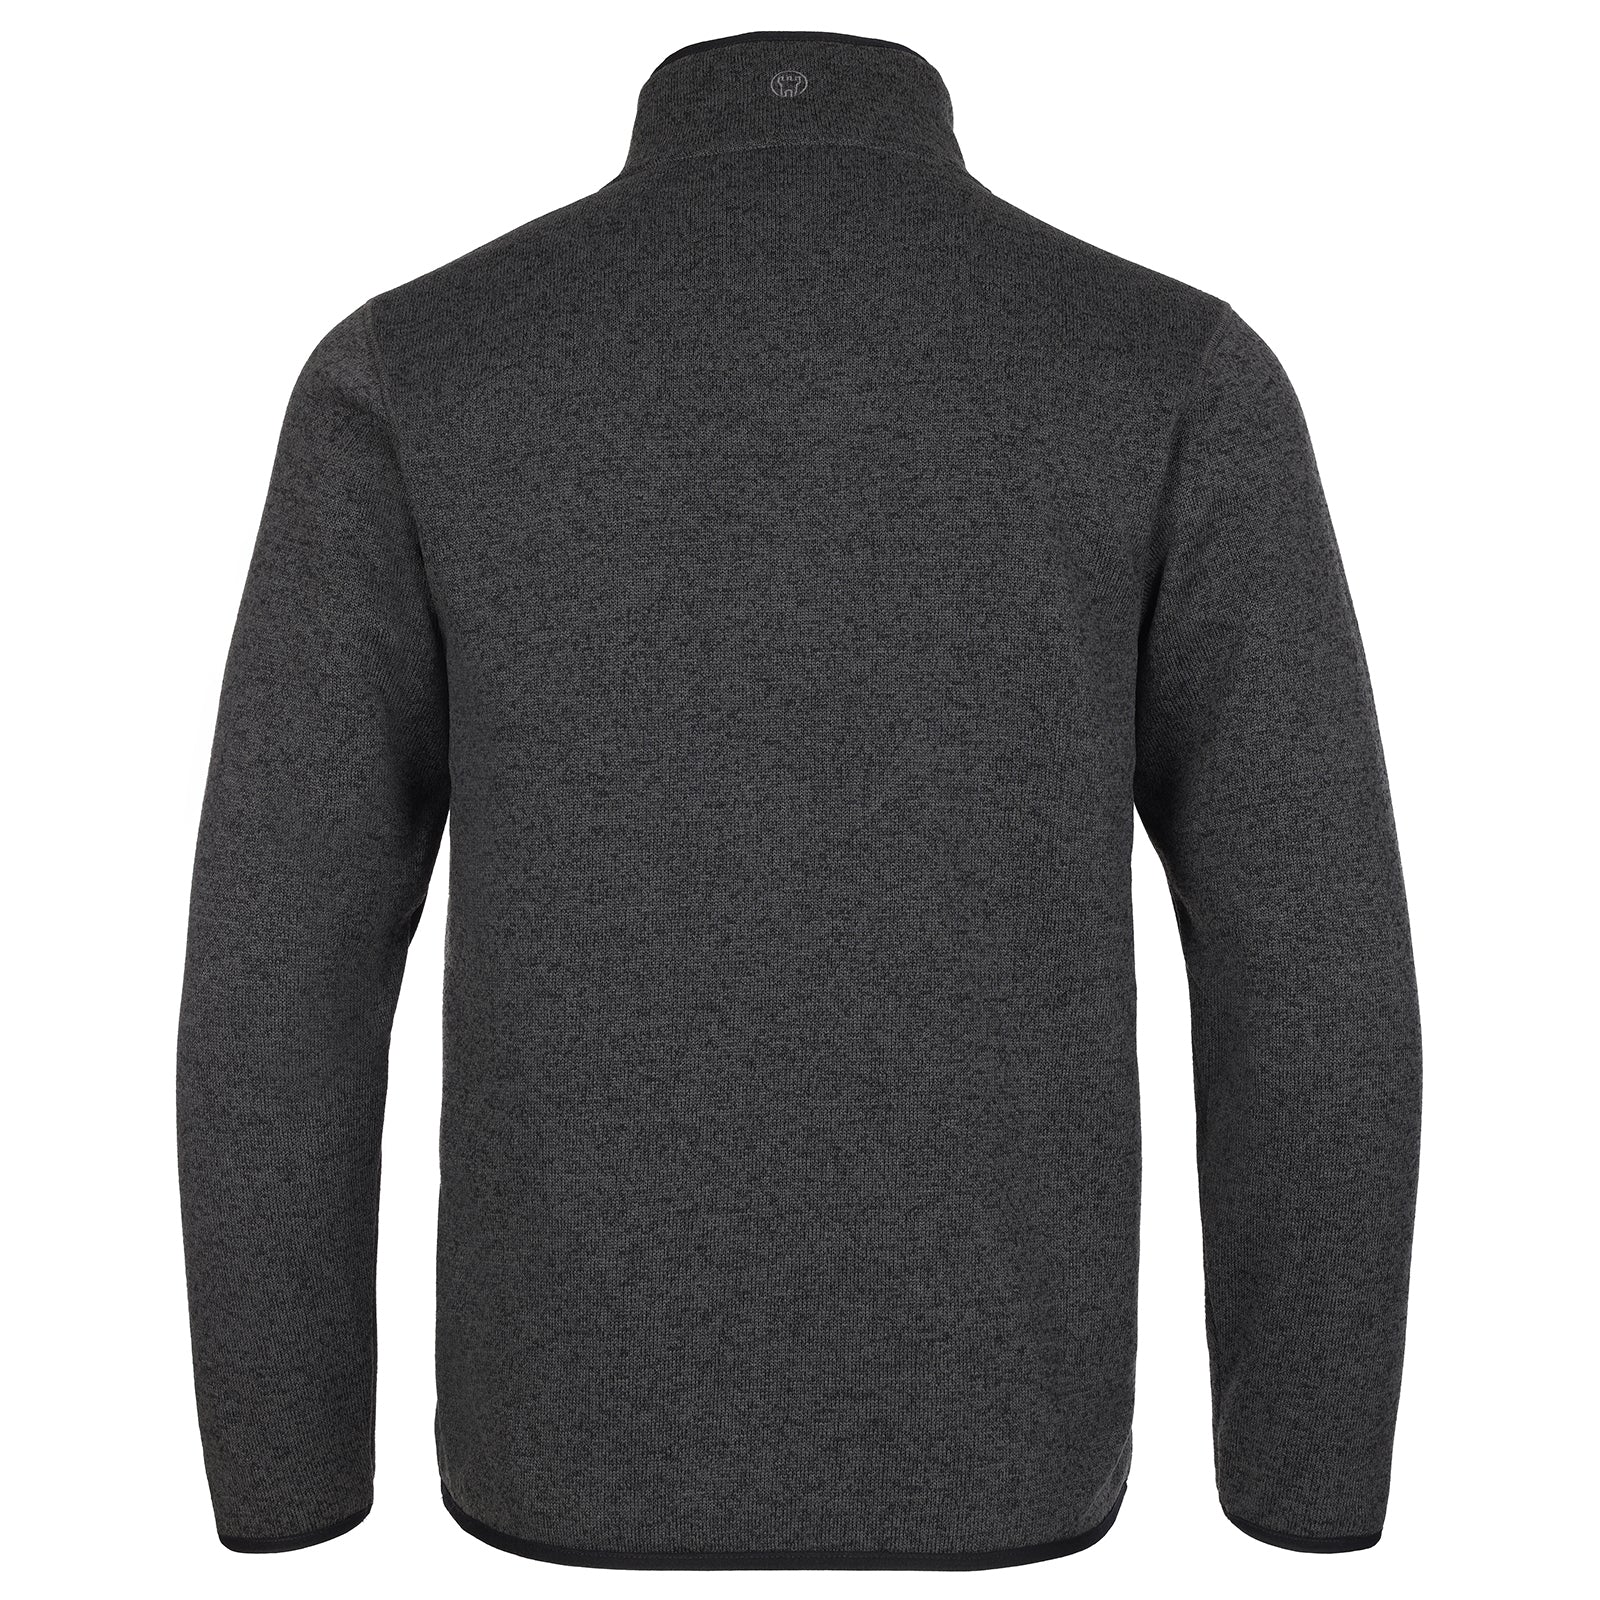 Fort Workwear Easton Pullover